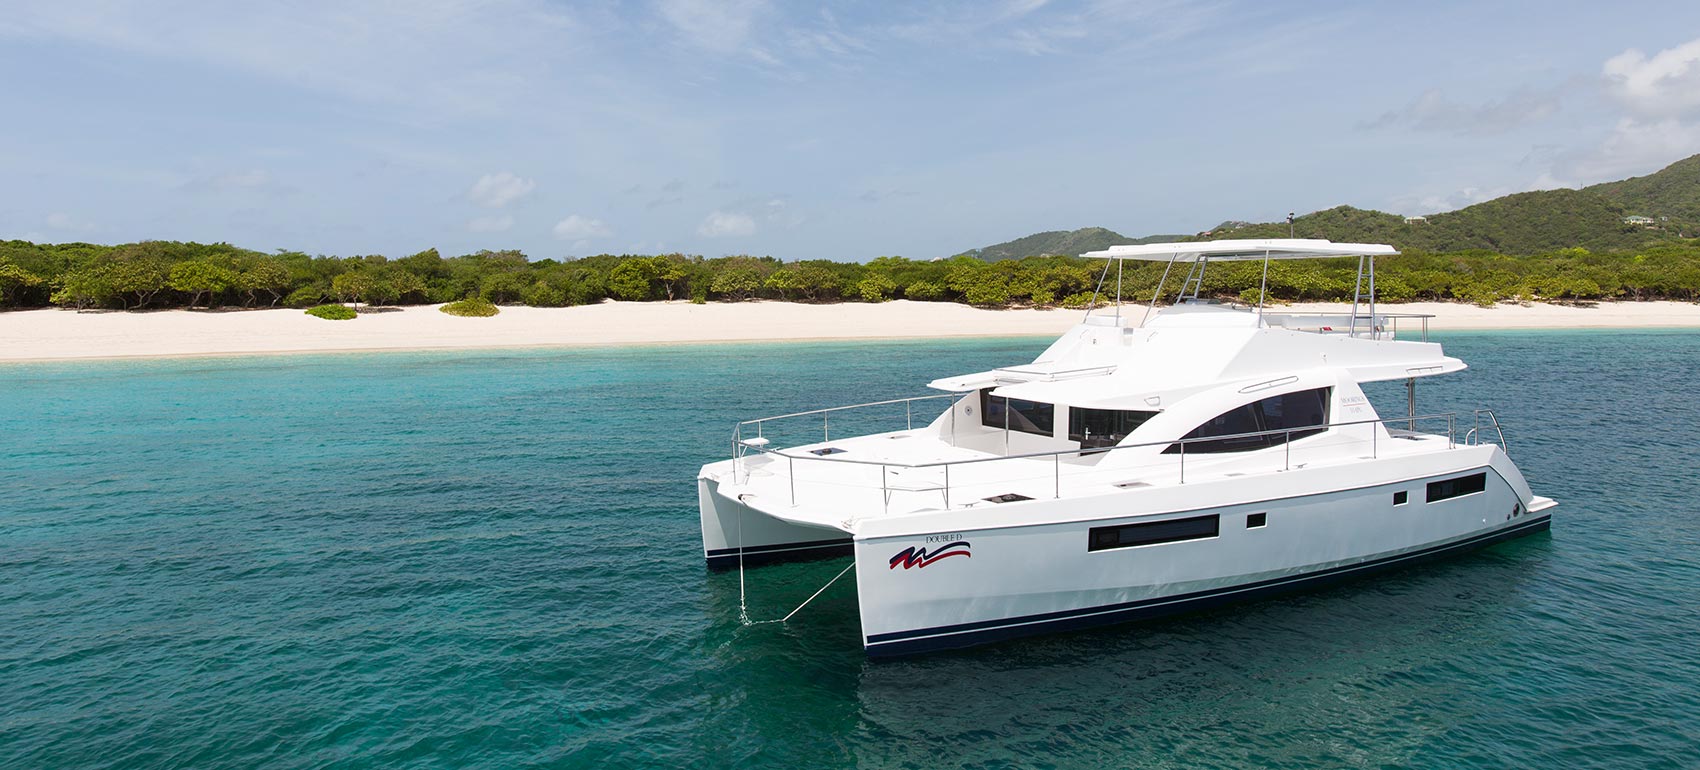 the moorings yacht charter reviews